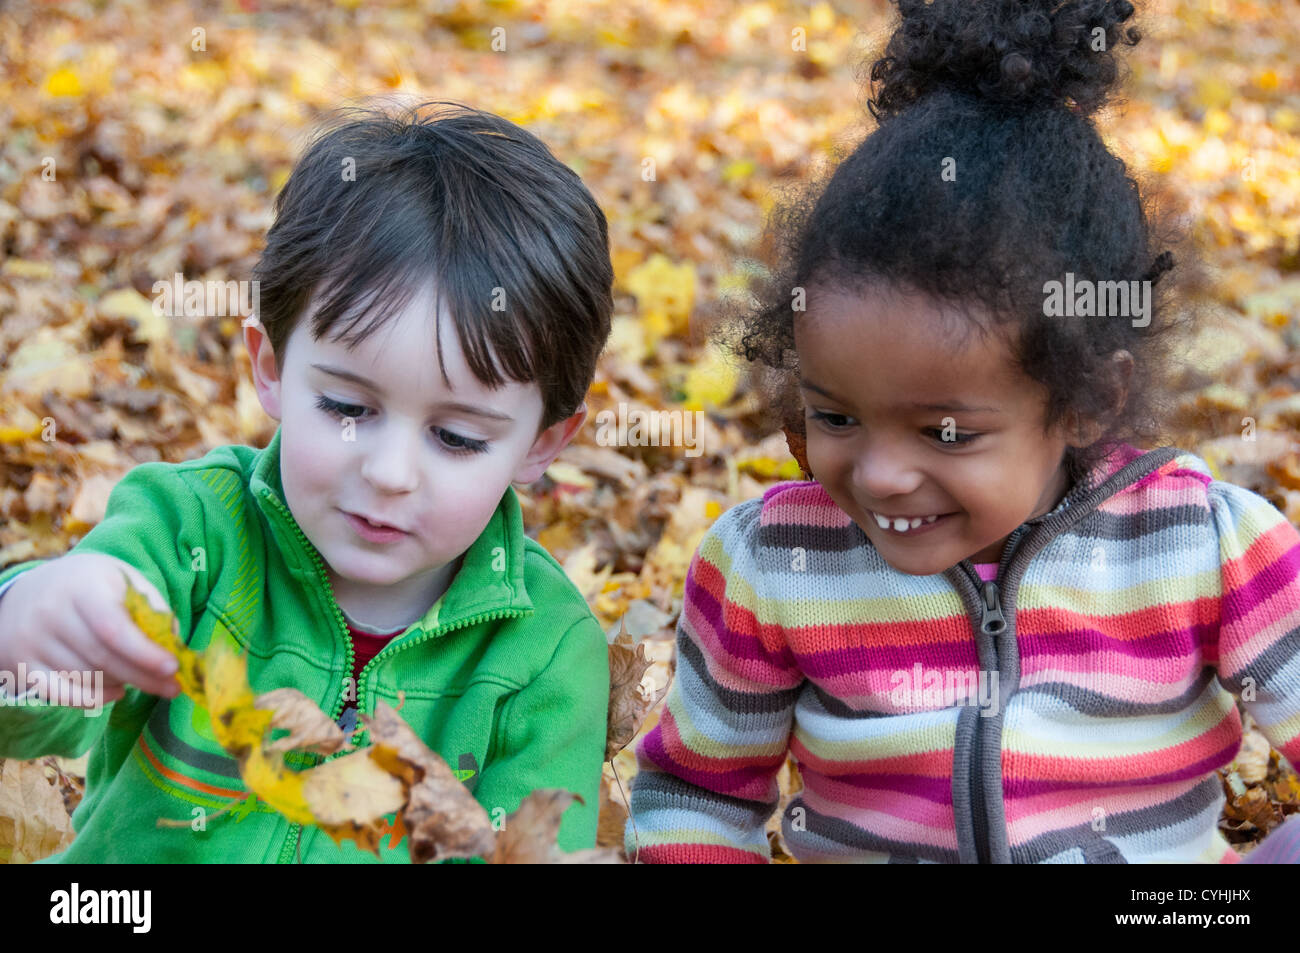 Two children playing in leaves Stock Photo